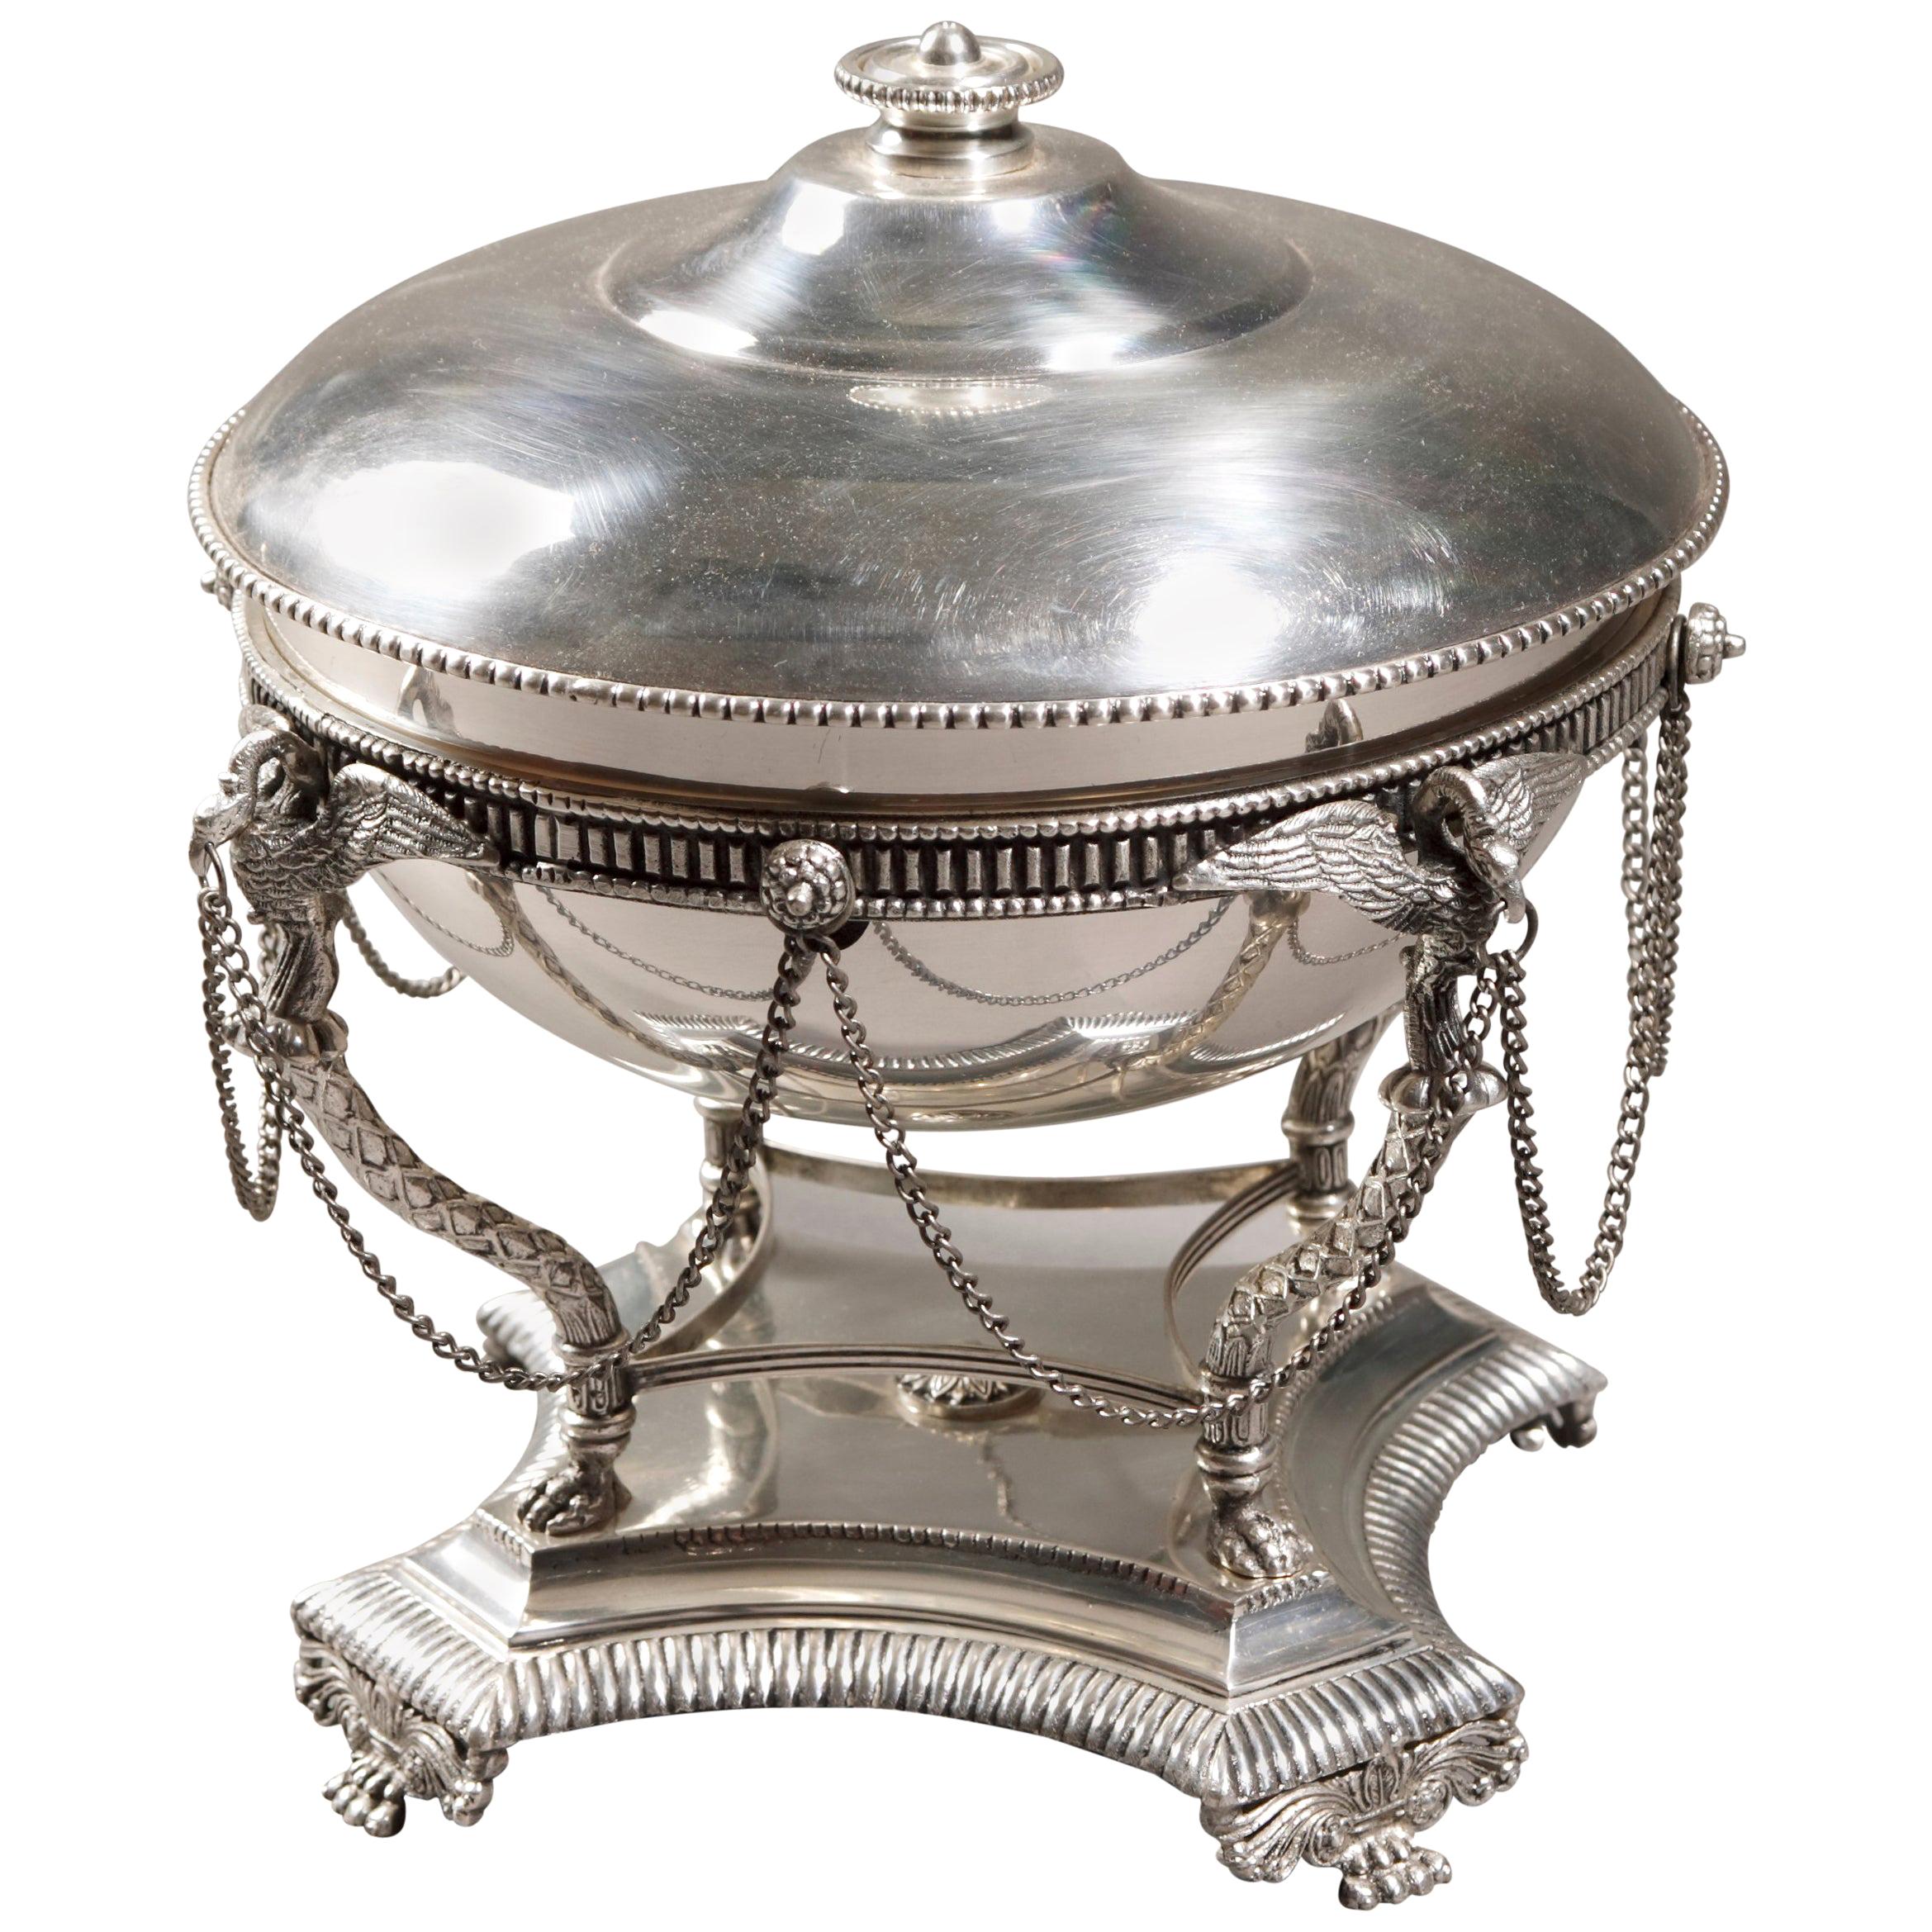 Lidded Service Terrine in Empire Style after J.B. Claude Odiot For Sale